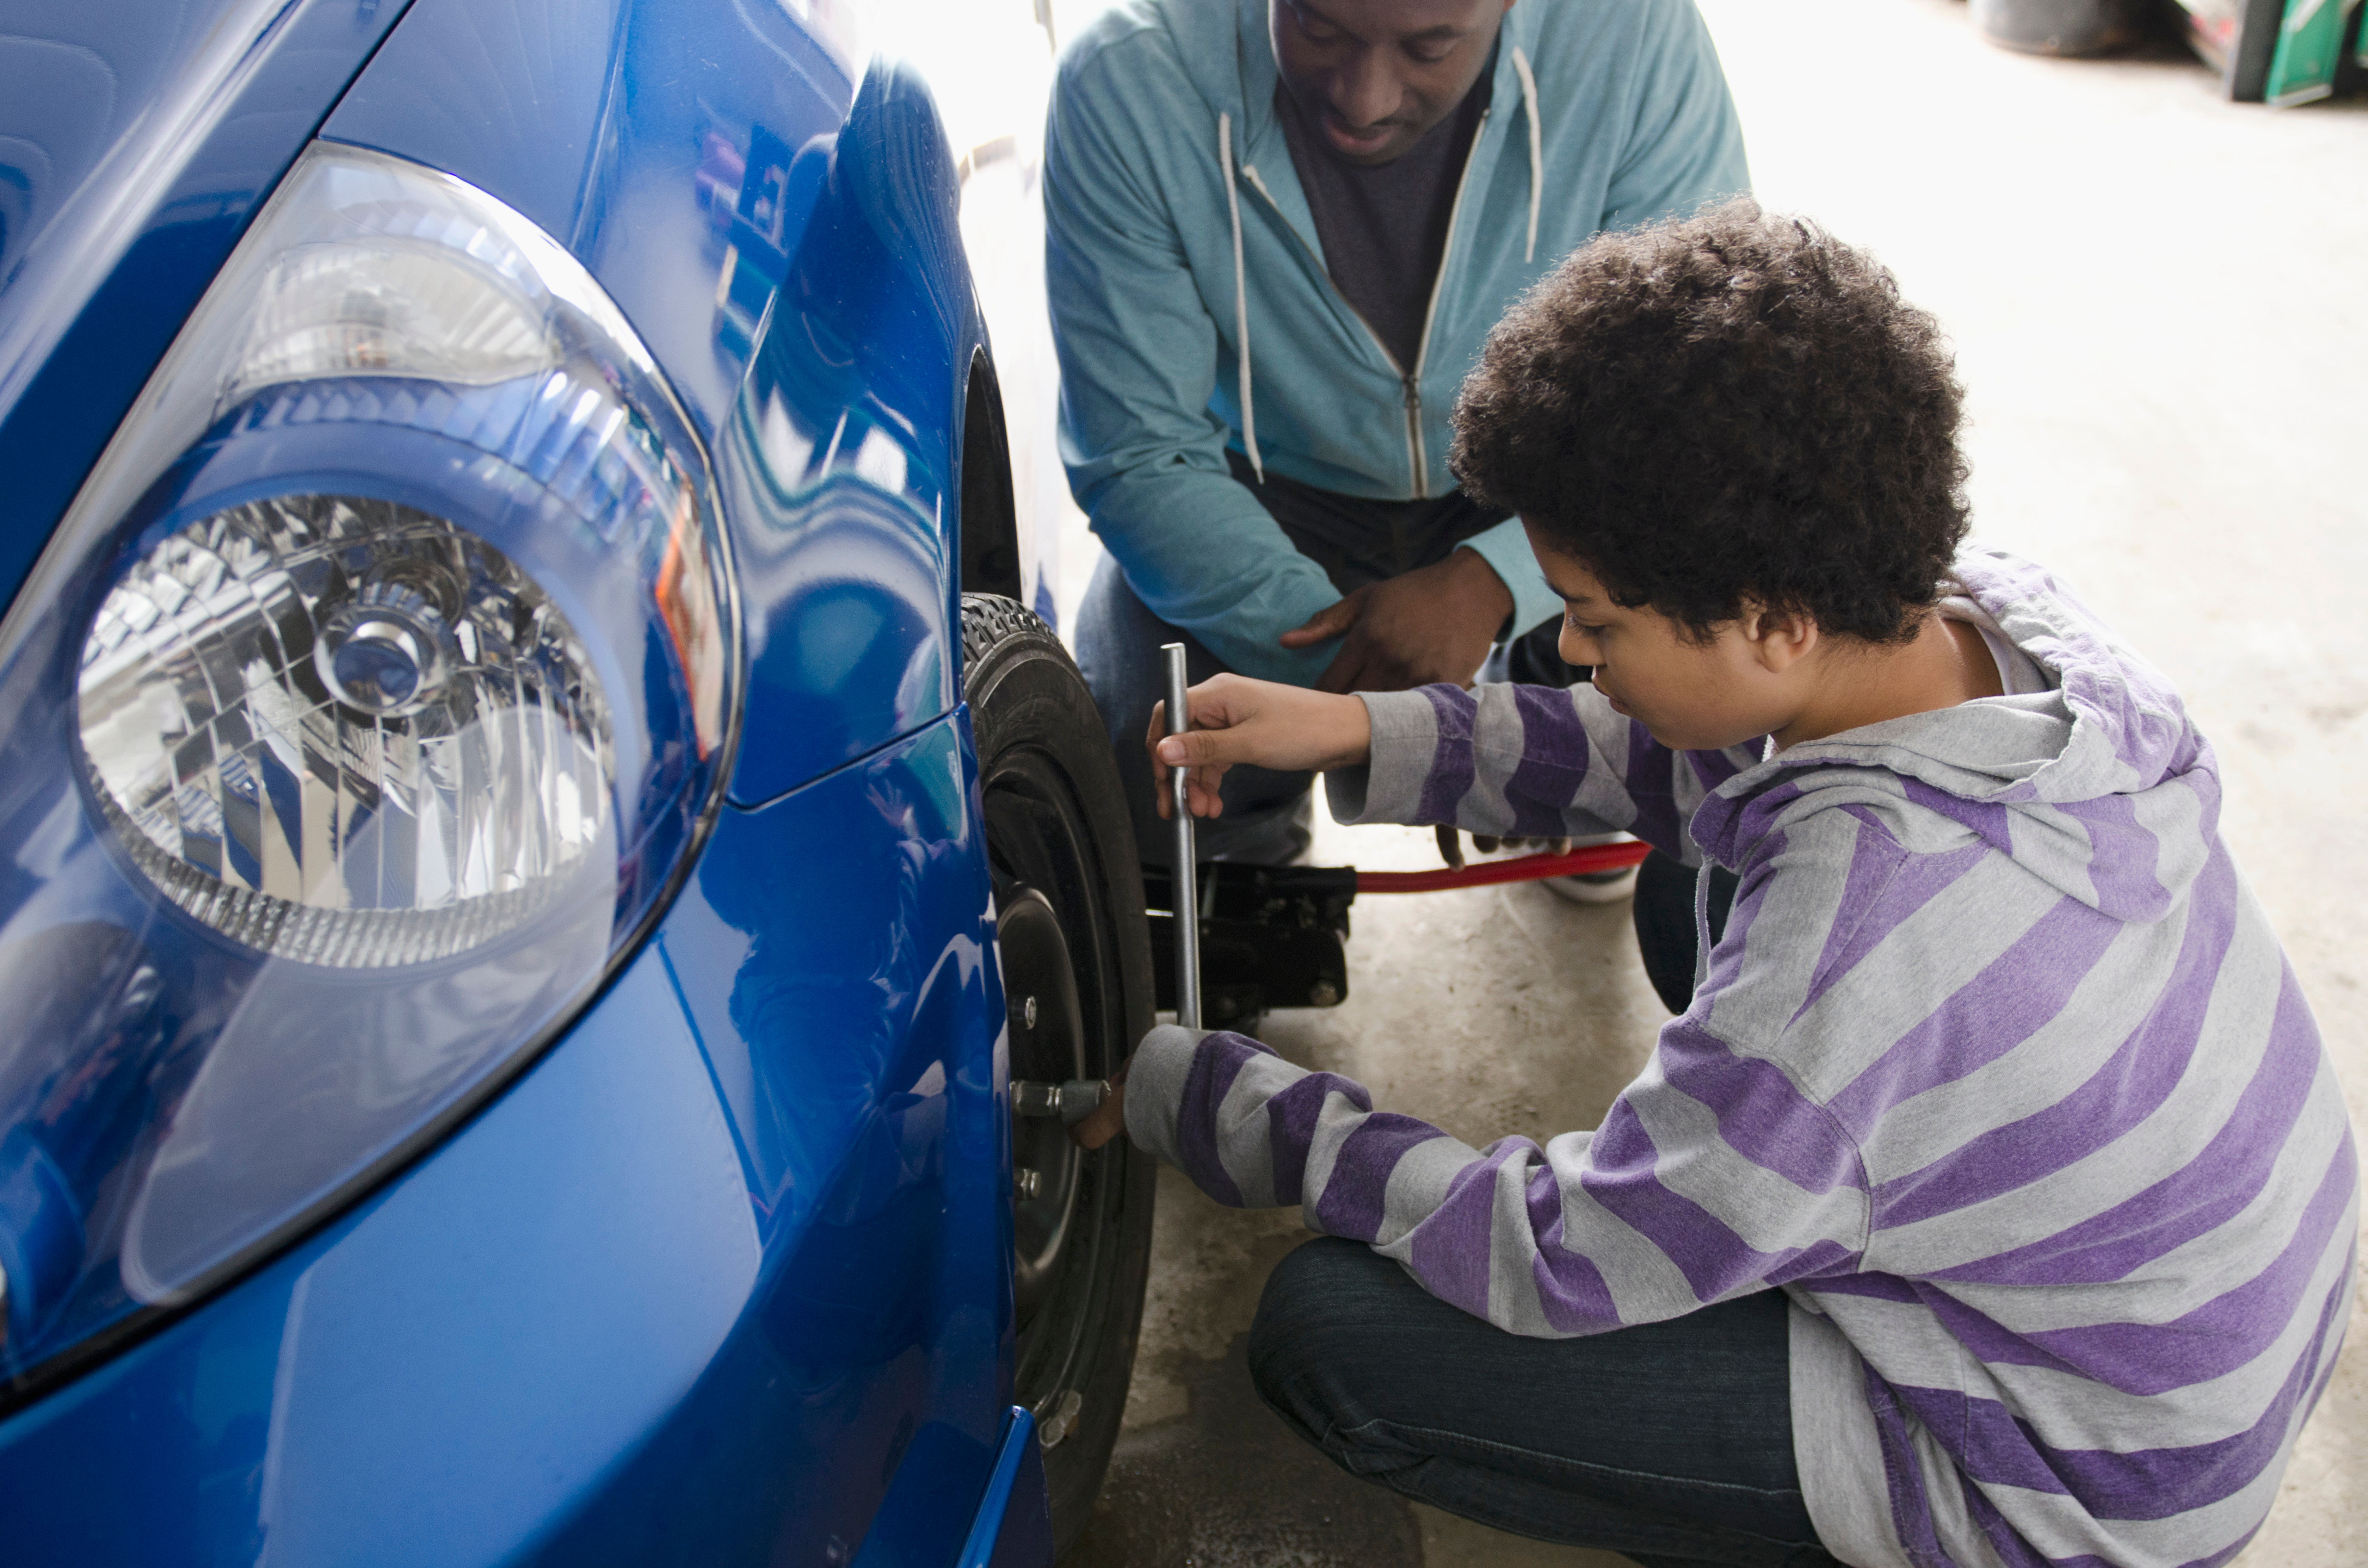 Teen learning life skills with car maintenance